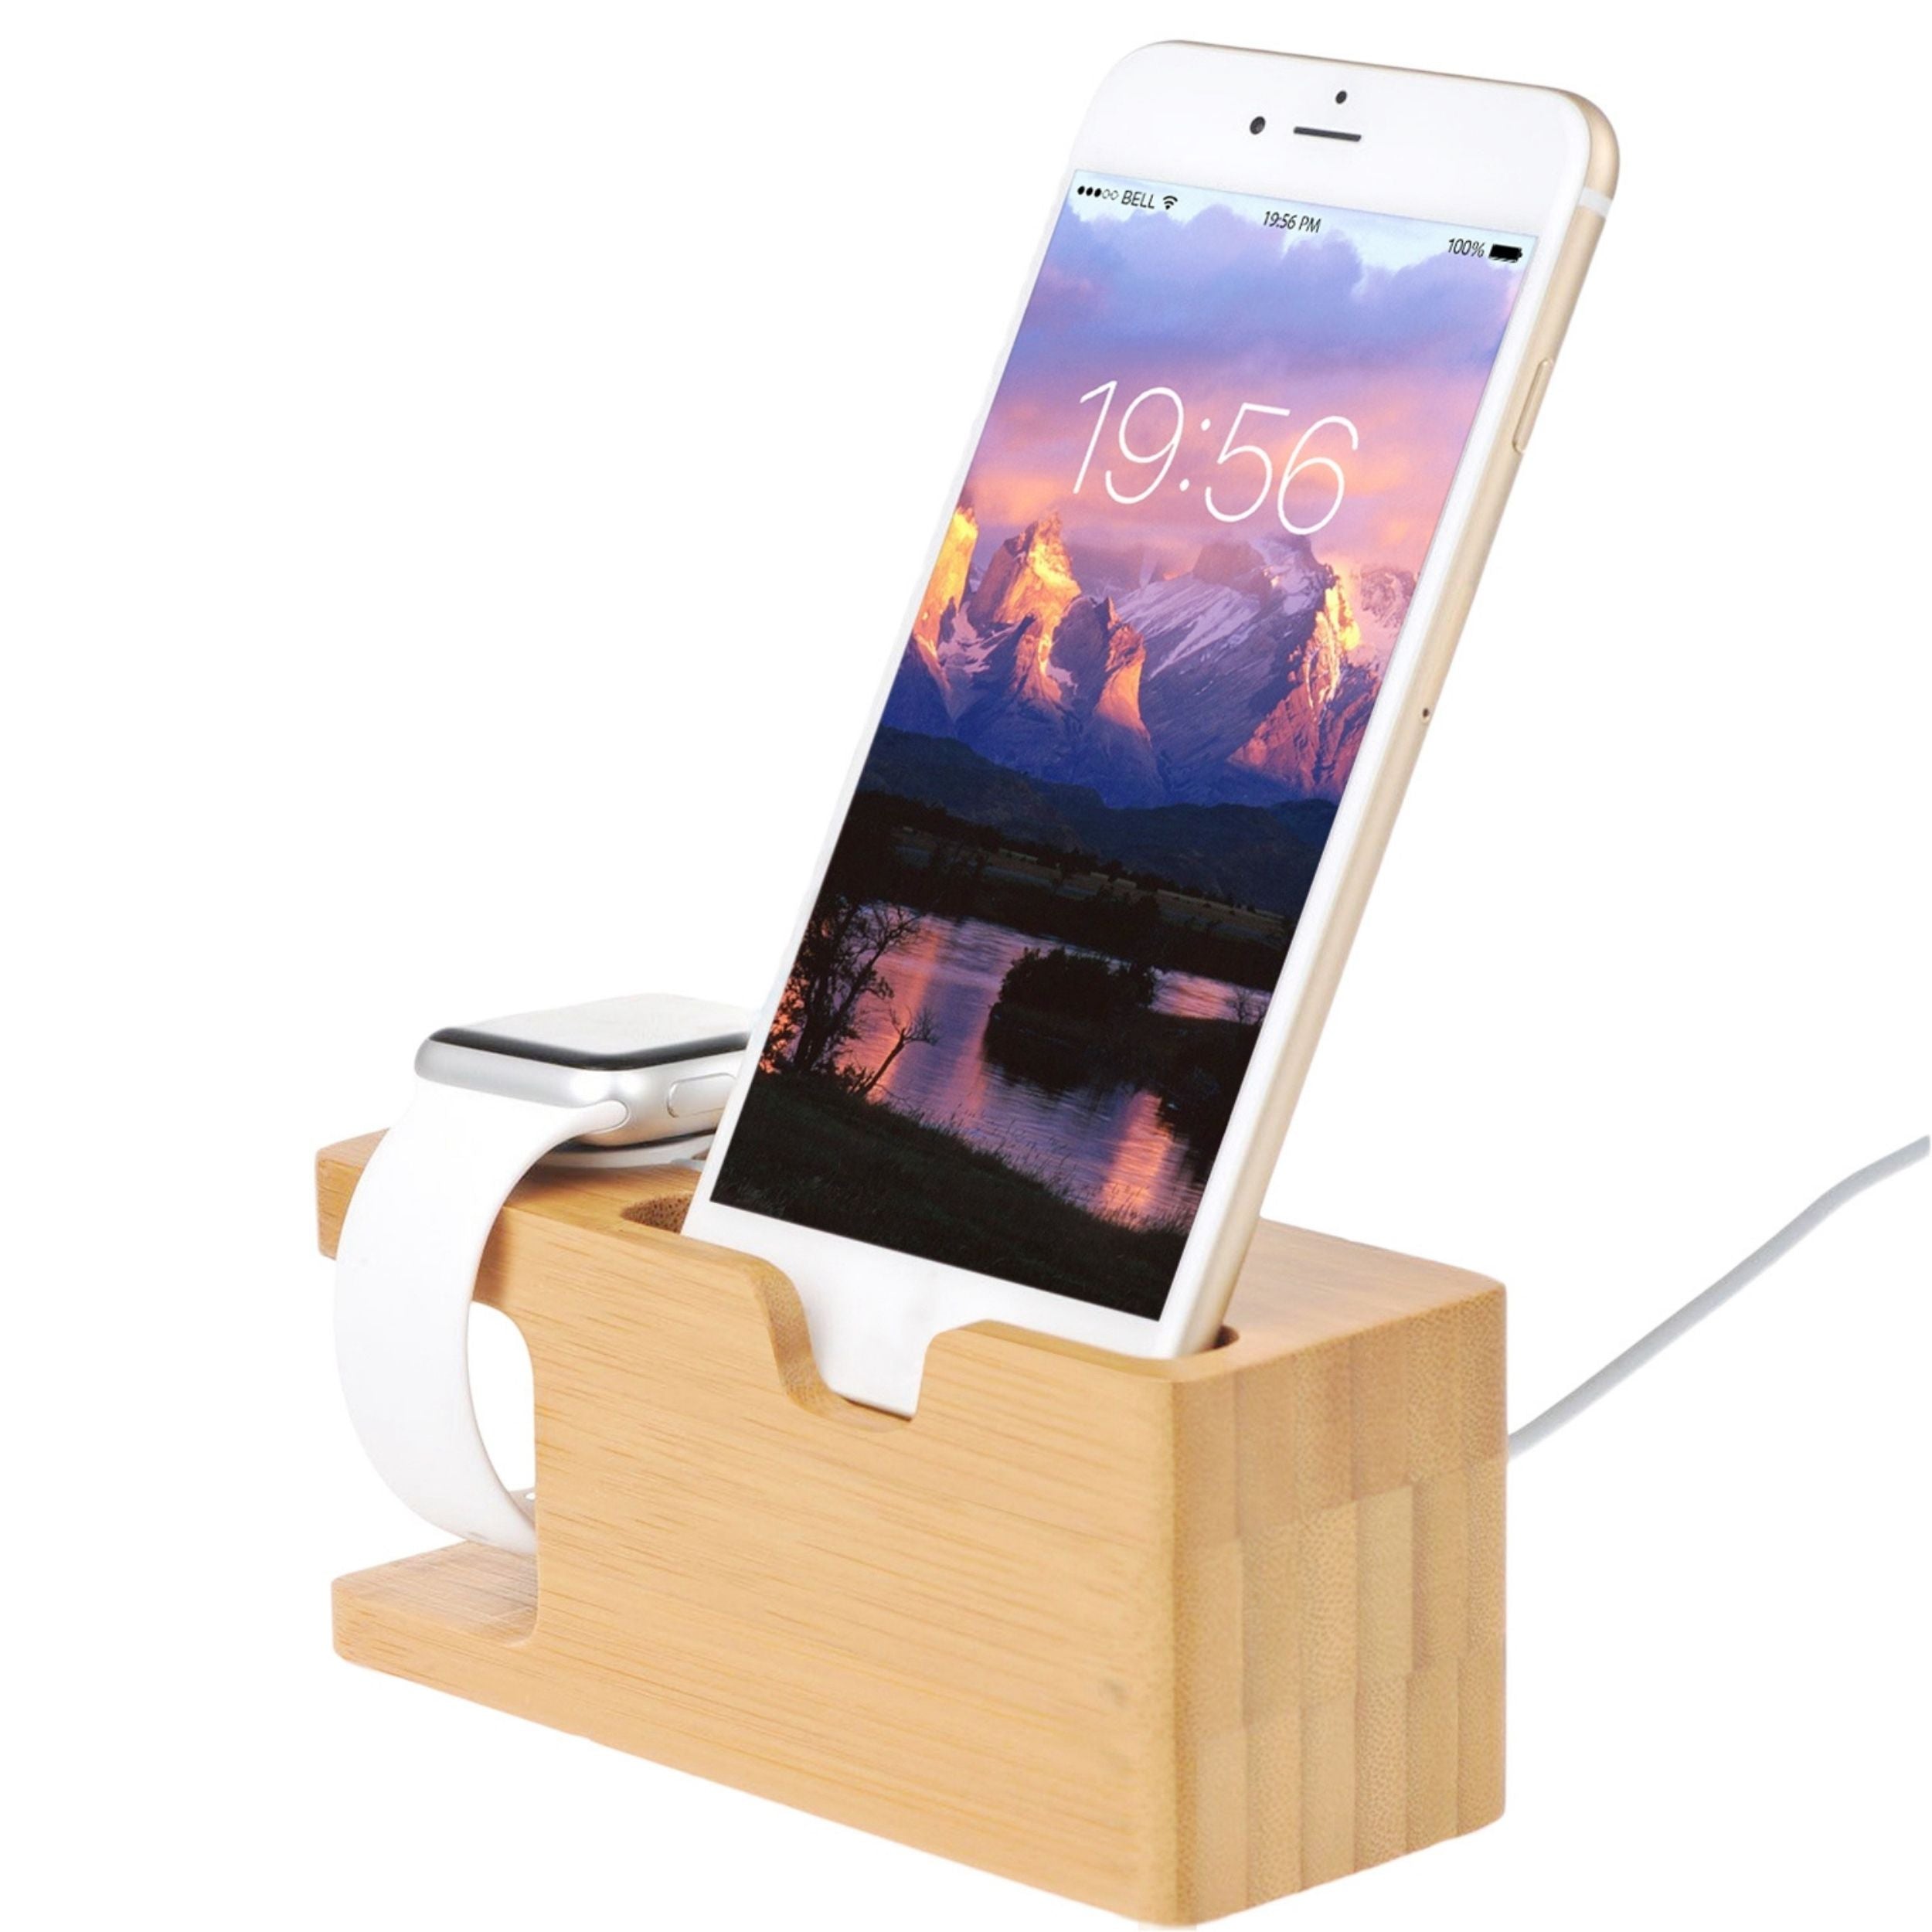 Fresh Fab Finds Bamboo Wood Charging Stand for Apple Watch 42mm 38mm Universal Phone Holder Dock Station iPhone X XS Max XR Galaxy S10/S9+ Google Nexus 6 One Size